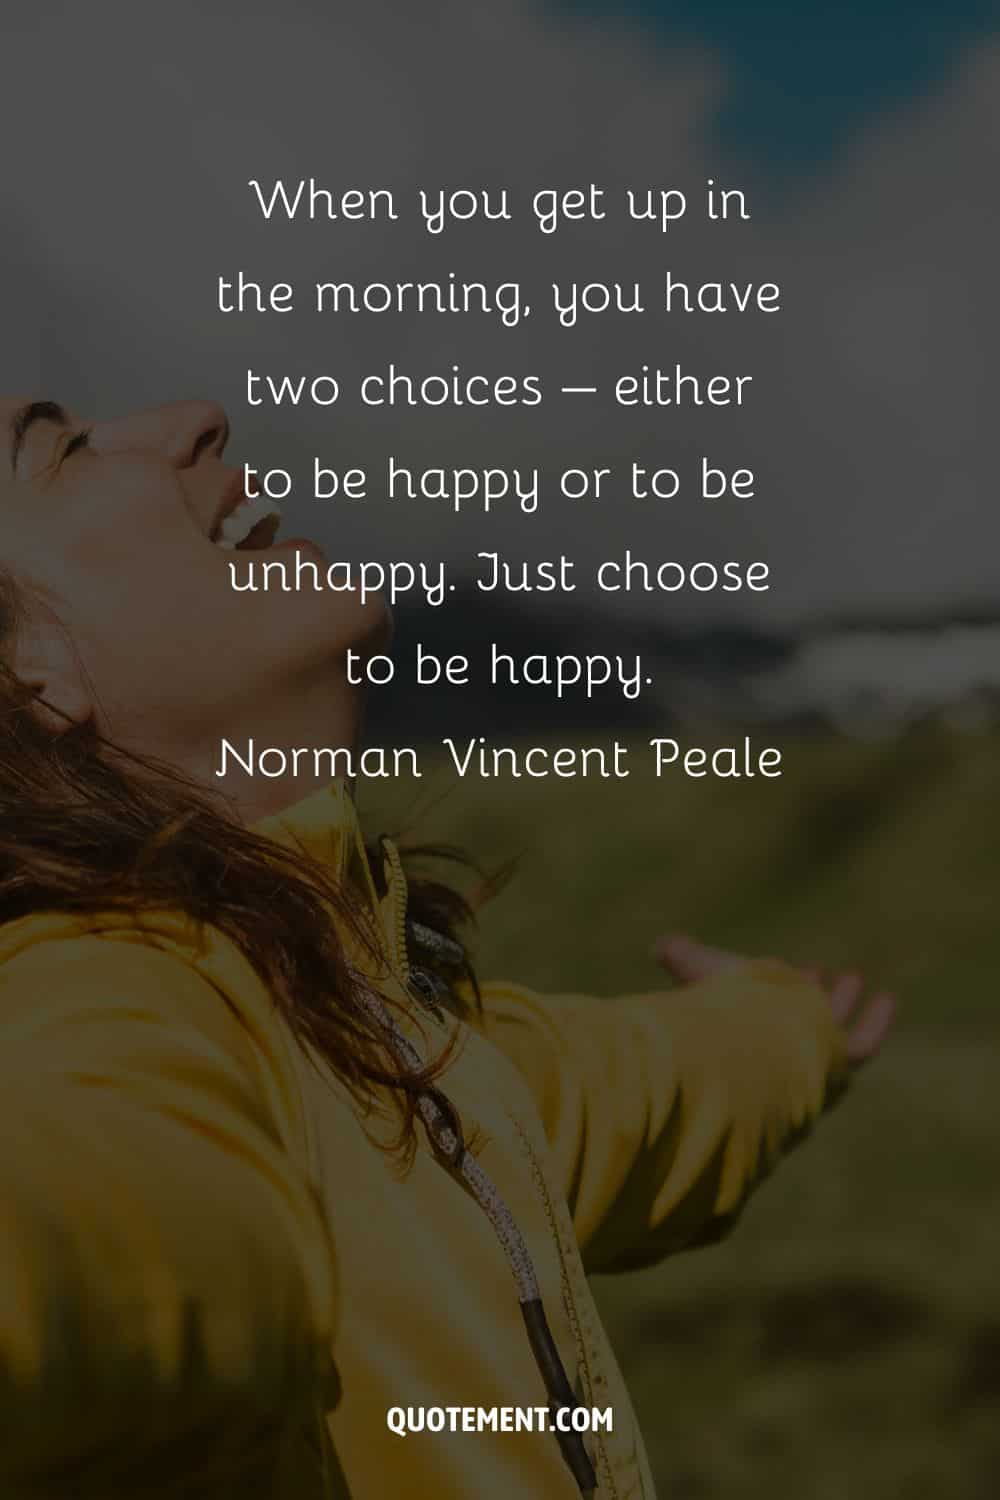 Inspirational quote on happiness and a smiling woman